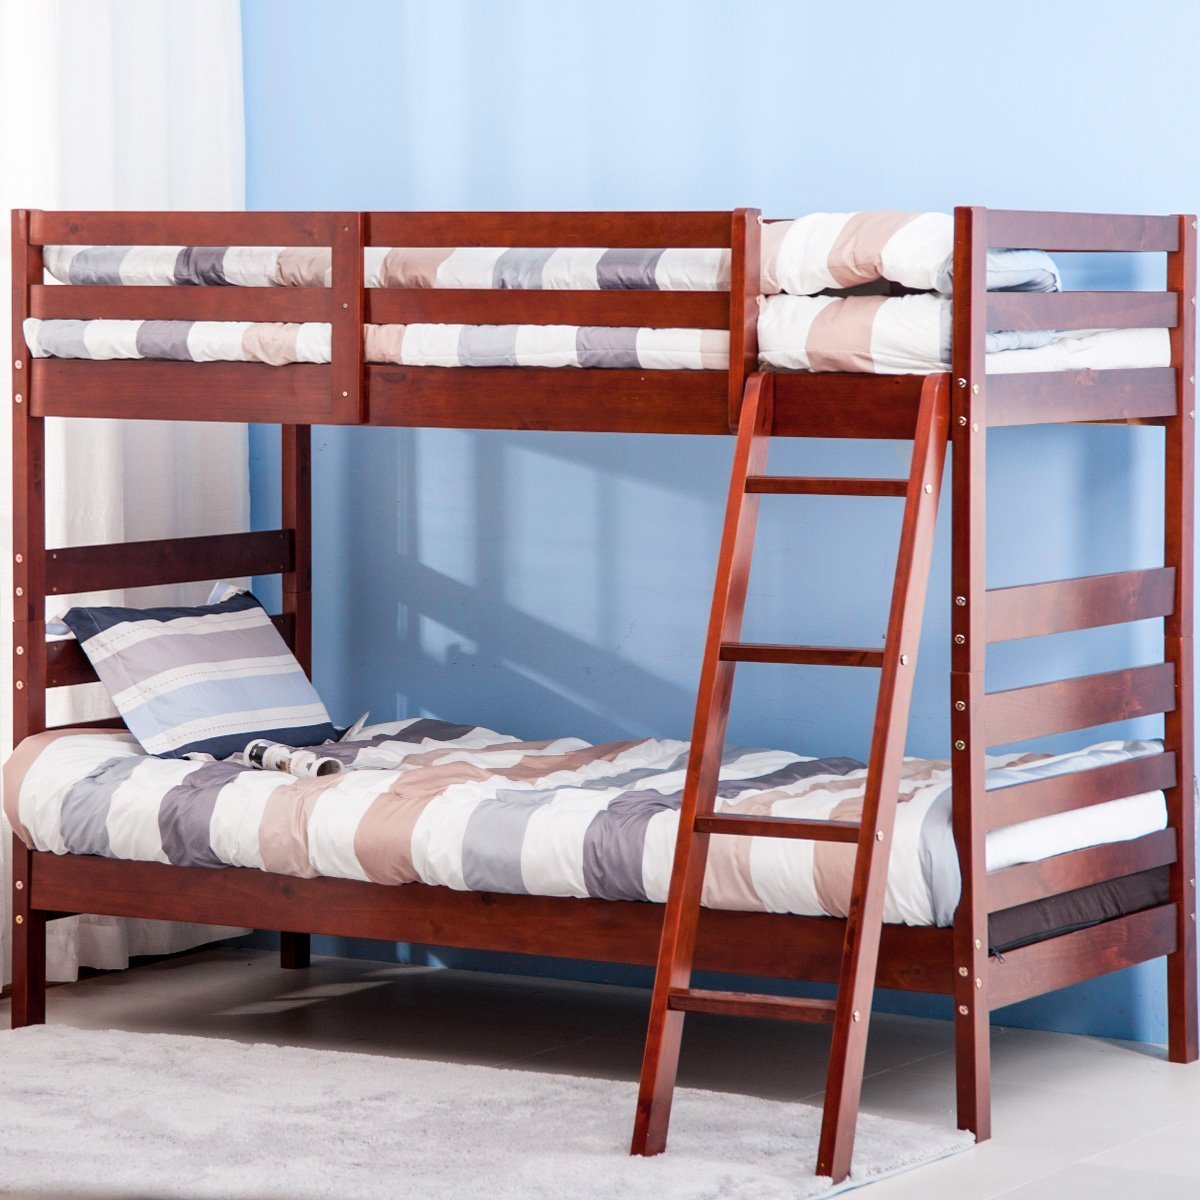 Chic and Cheap Bunk Beds under $200